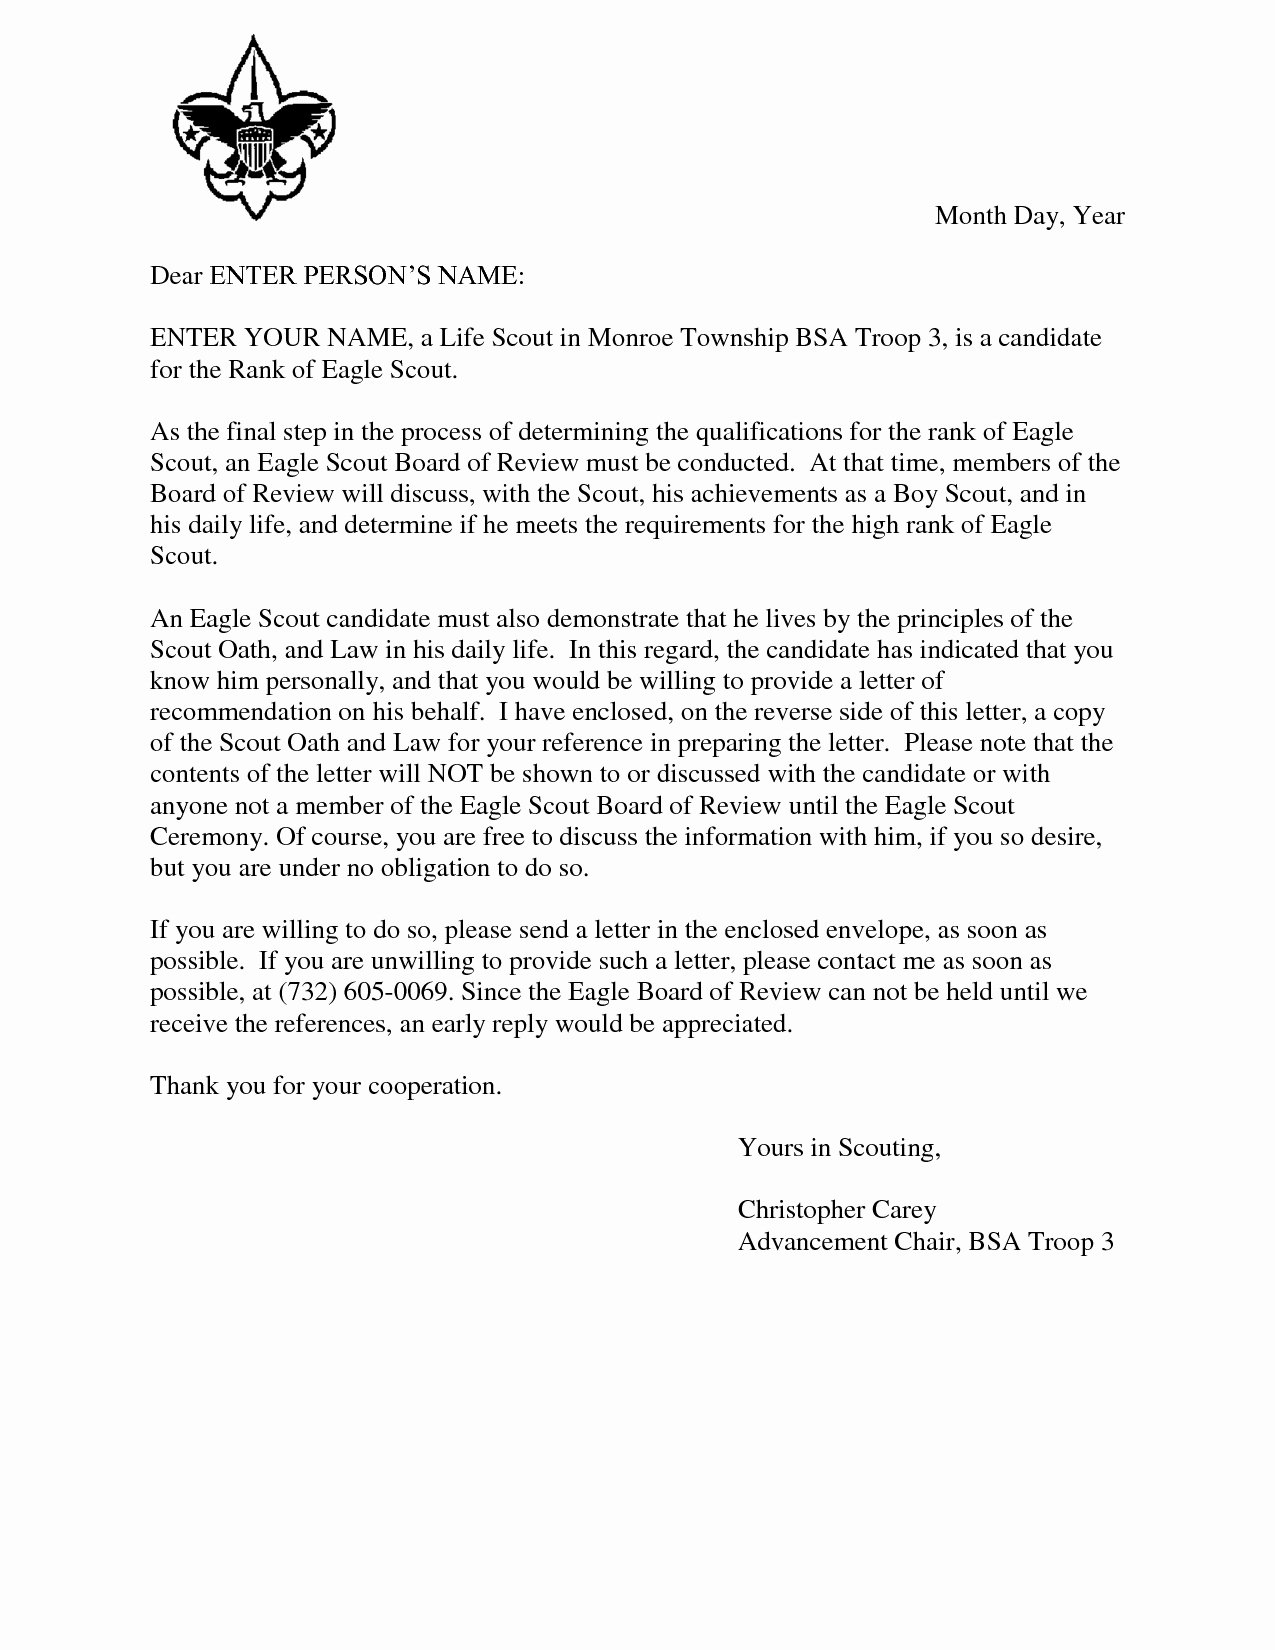 Boy Scouts Letter Of Recommendation Beautiful Boy Scout Donation Letter Template Samples